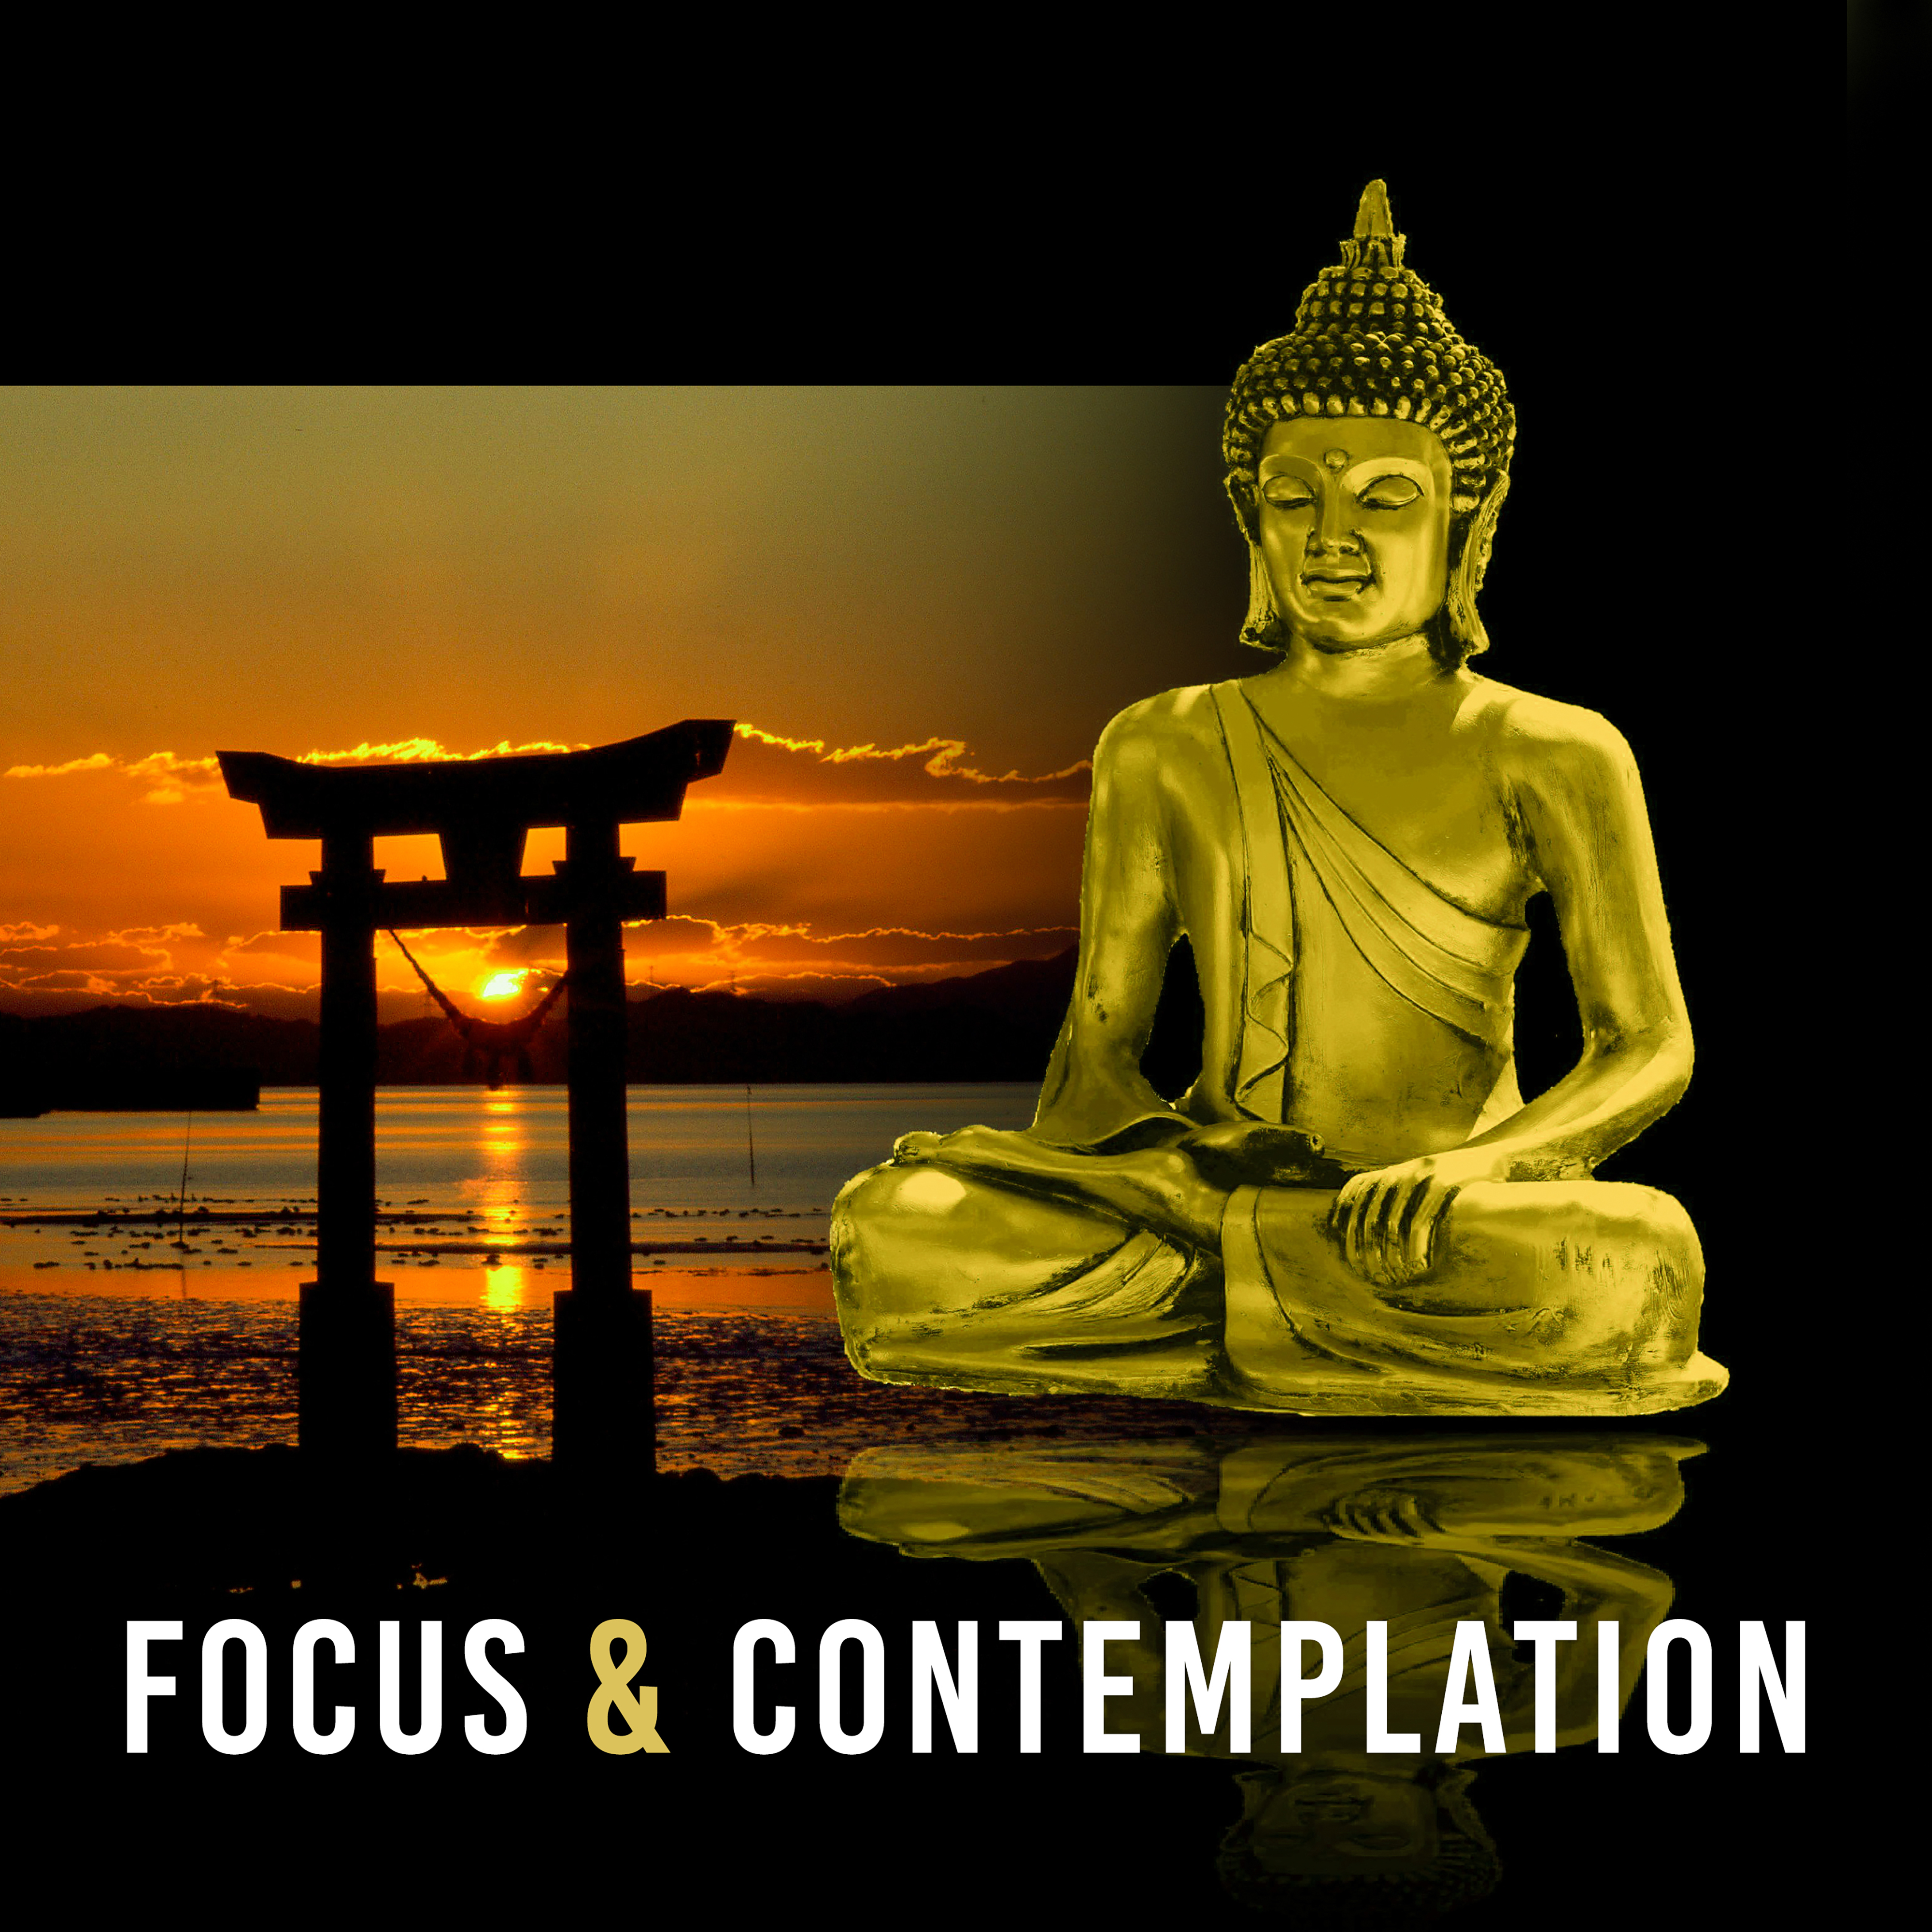 Focus & Contemplation – Nature Sounds for Meditation, Sea Waves, Singing Birds, Restful Piano, Better Concentration, Calm Mind